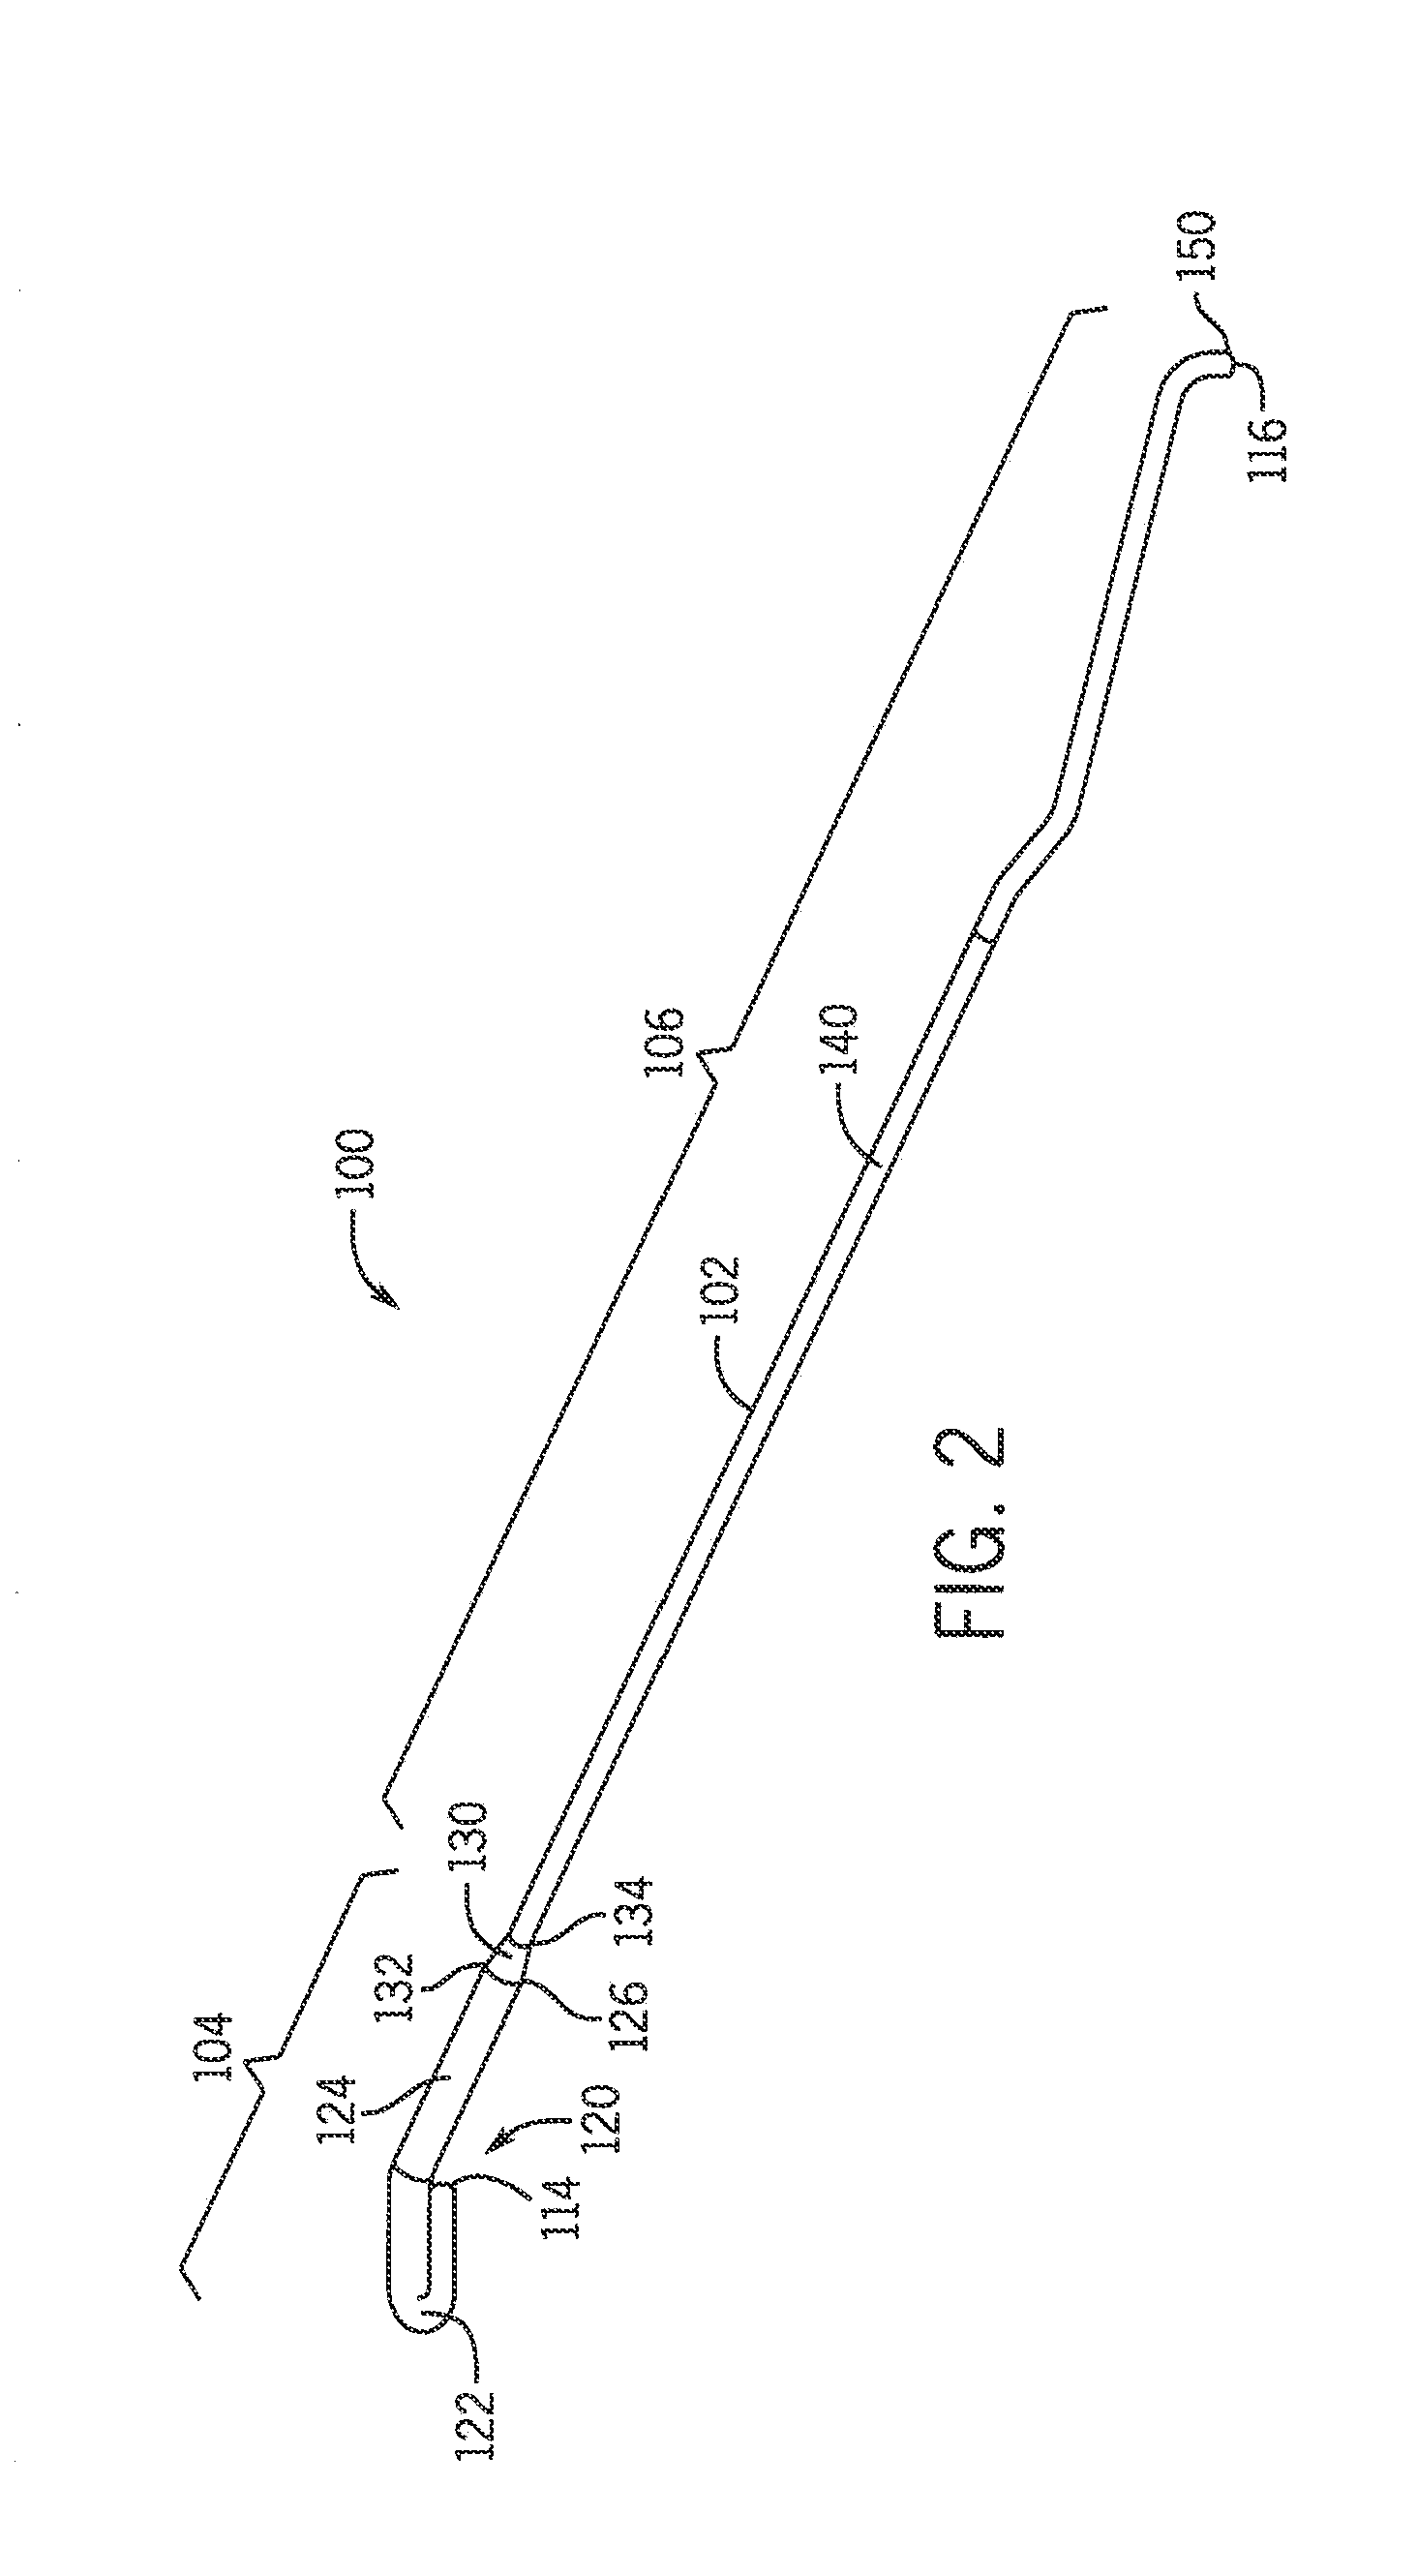 System and method for use of flexible Anti-reflux ureteral stent